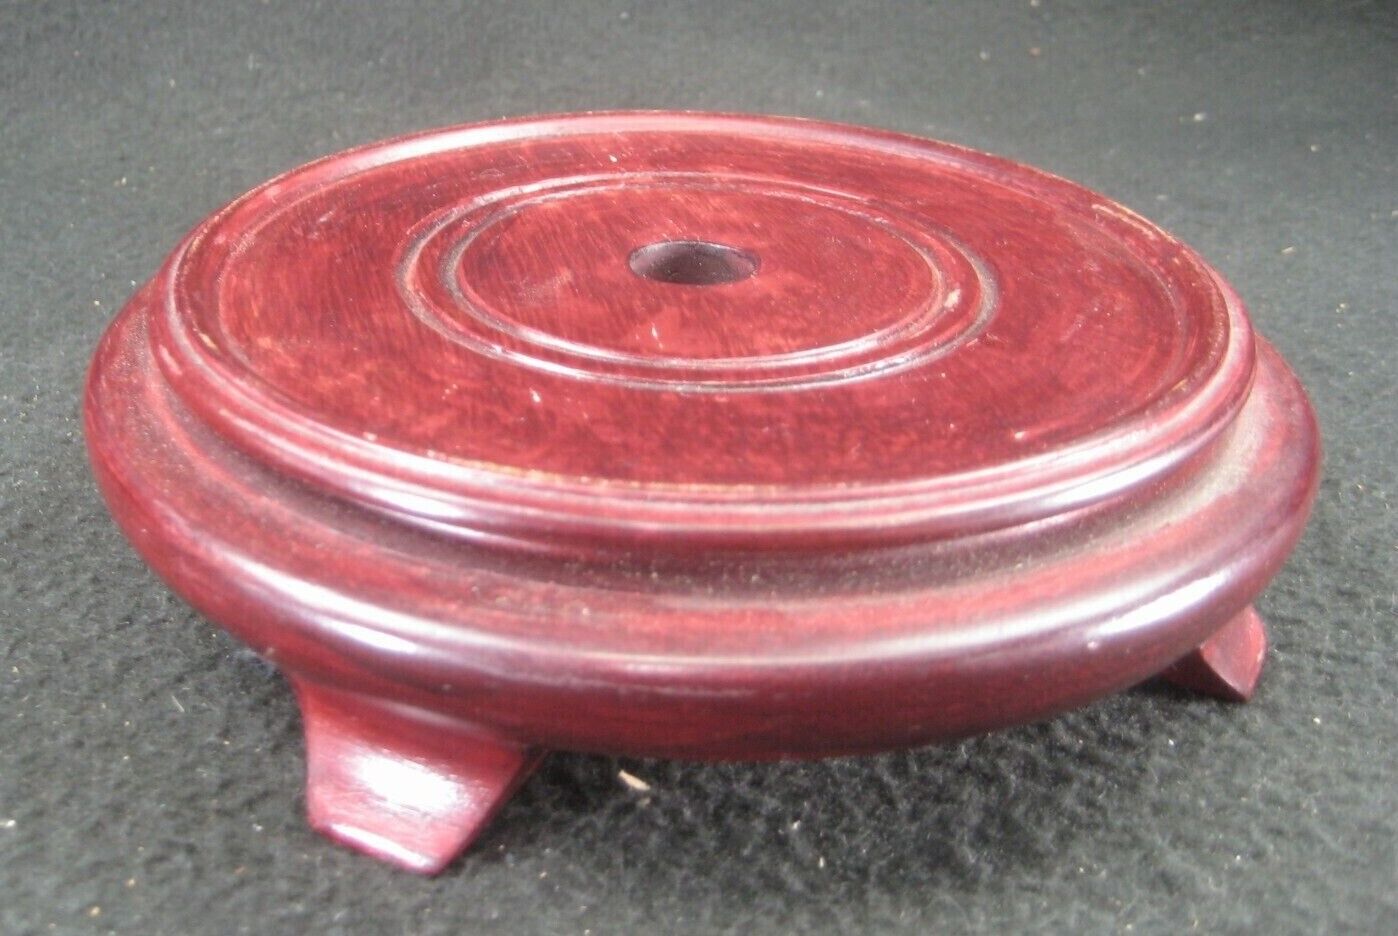 Vintage / Antique Red Stained Chinese Vase Bowl Stand Pedestal Display 5"